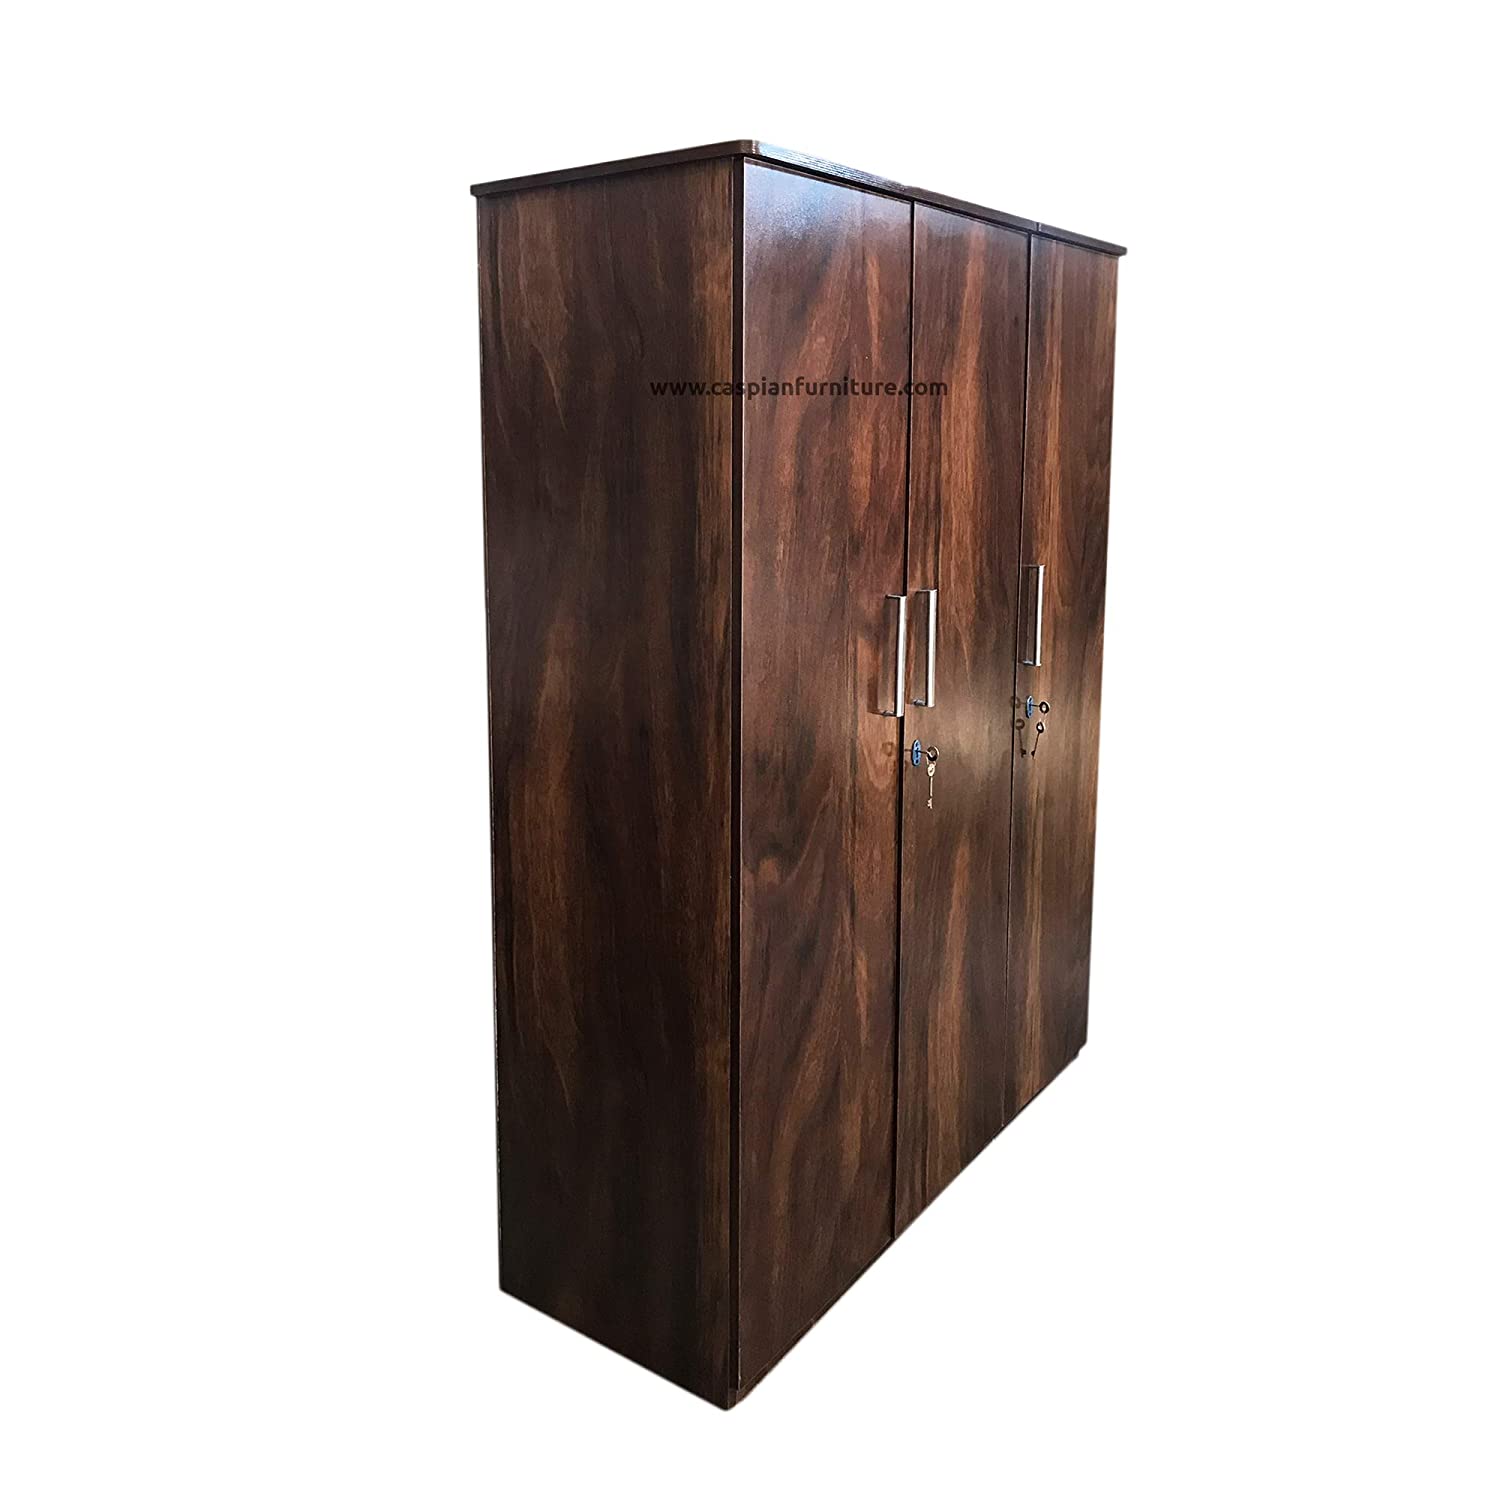 Wood Textured 3 Door Wardrobe with Locker, Drawers, Shelves and Hanging Space for Clothes | Wardrobe for Clothes